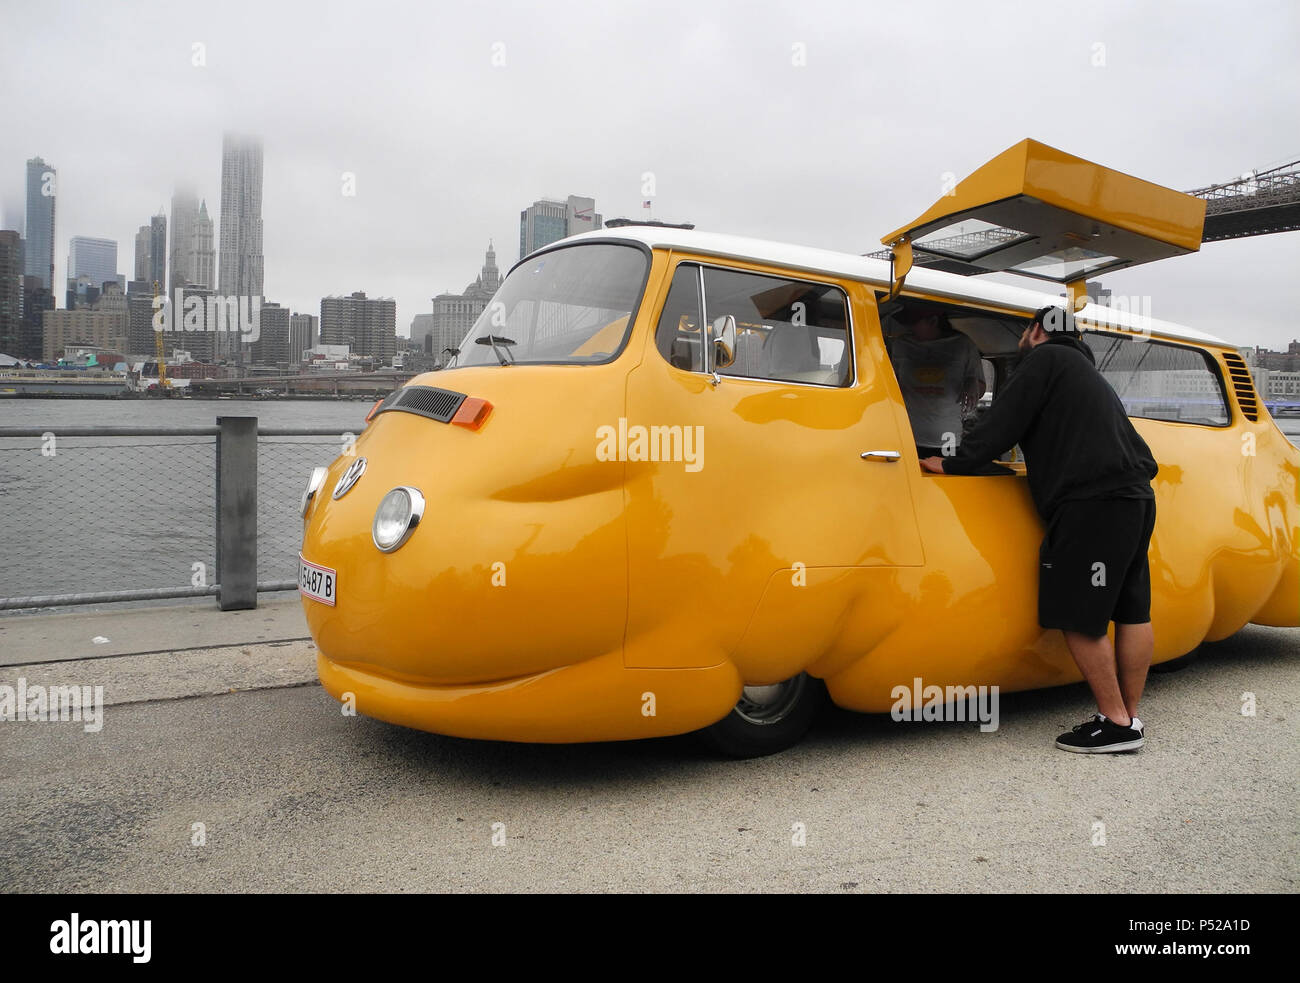 New York, USA. 23rd June, 2018. From a mustard-yellow bus, sausages are distributed free of charge - in the background of the 'Hot Dog Bus' by the Austrian artist Erwin Wurm, the skyline of Brooklyn can be seen across the river. The baggy, chubby minibus in the Brooklyn neighborhood is reminiscent of Wurm's Fat Car series of fat cars. Credit: Johannes Schmitt-Tegge/dpa/Alamy Live News Stock Photo